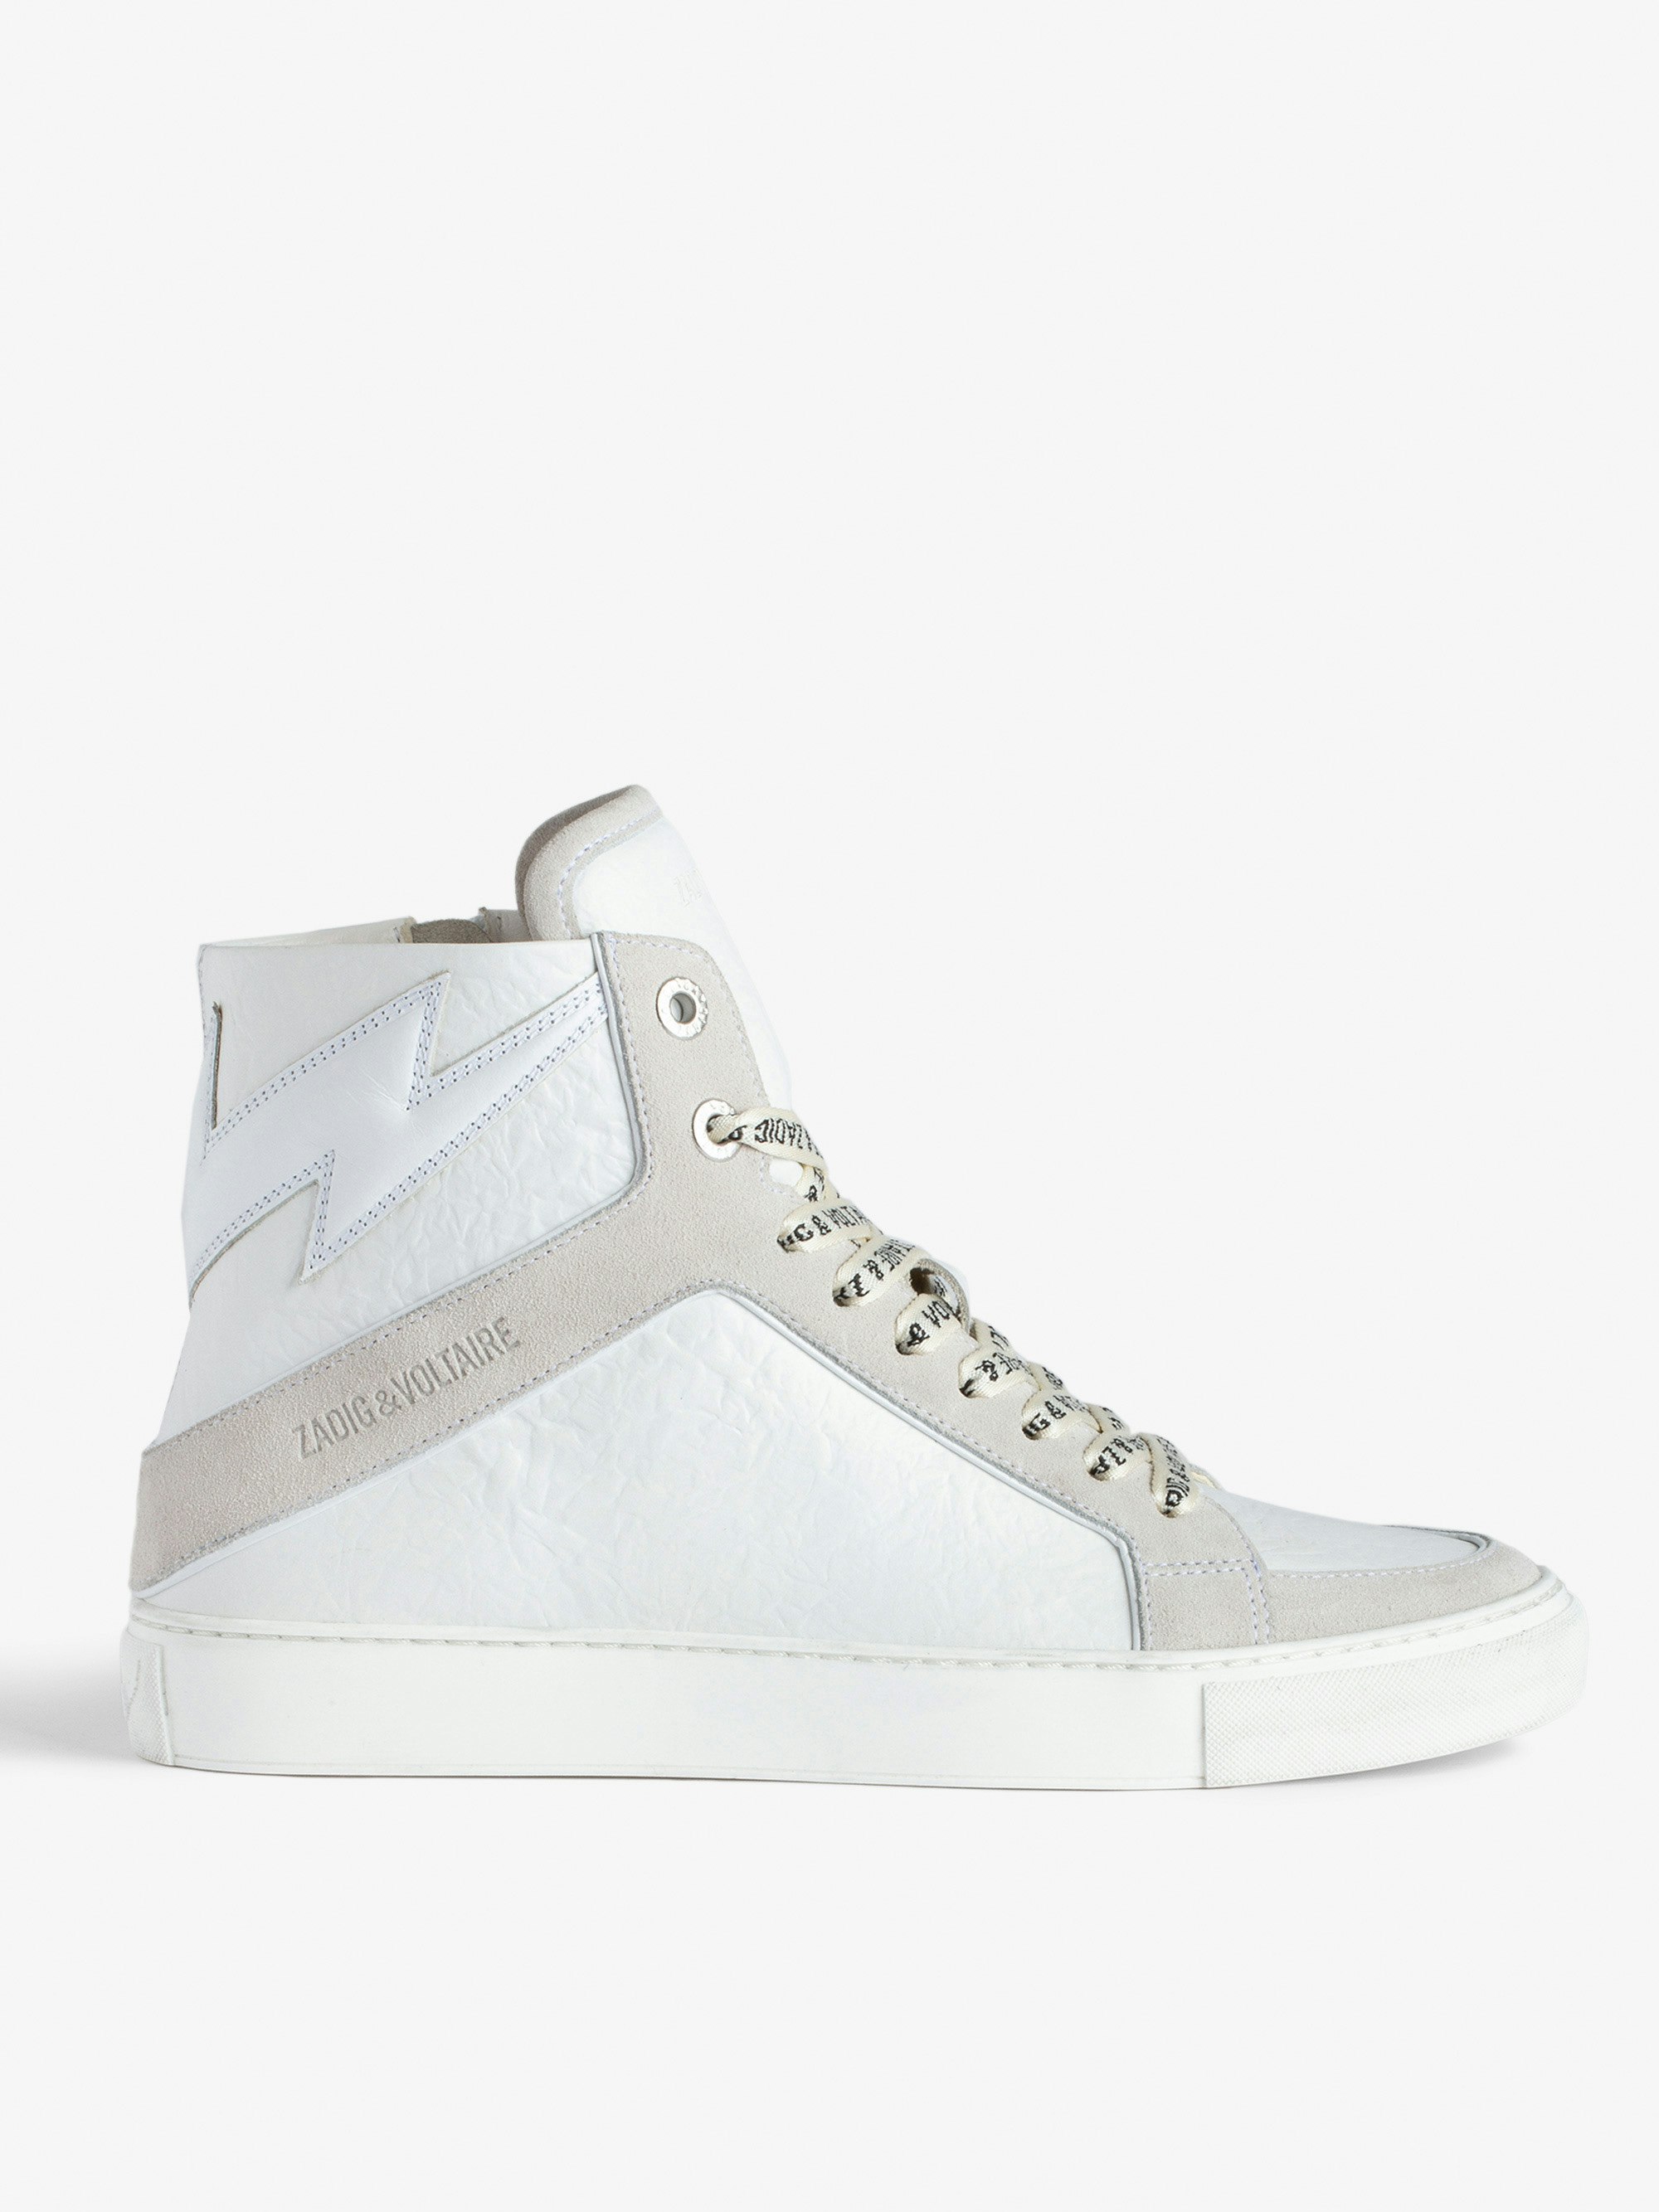 ZV1747 High Flash High-Top Crinkled Sneakers  - Women’s white distressed leather high-top sneakers with lightning bolt and suede panels.